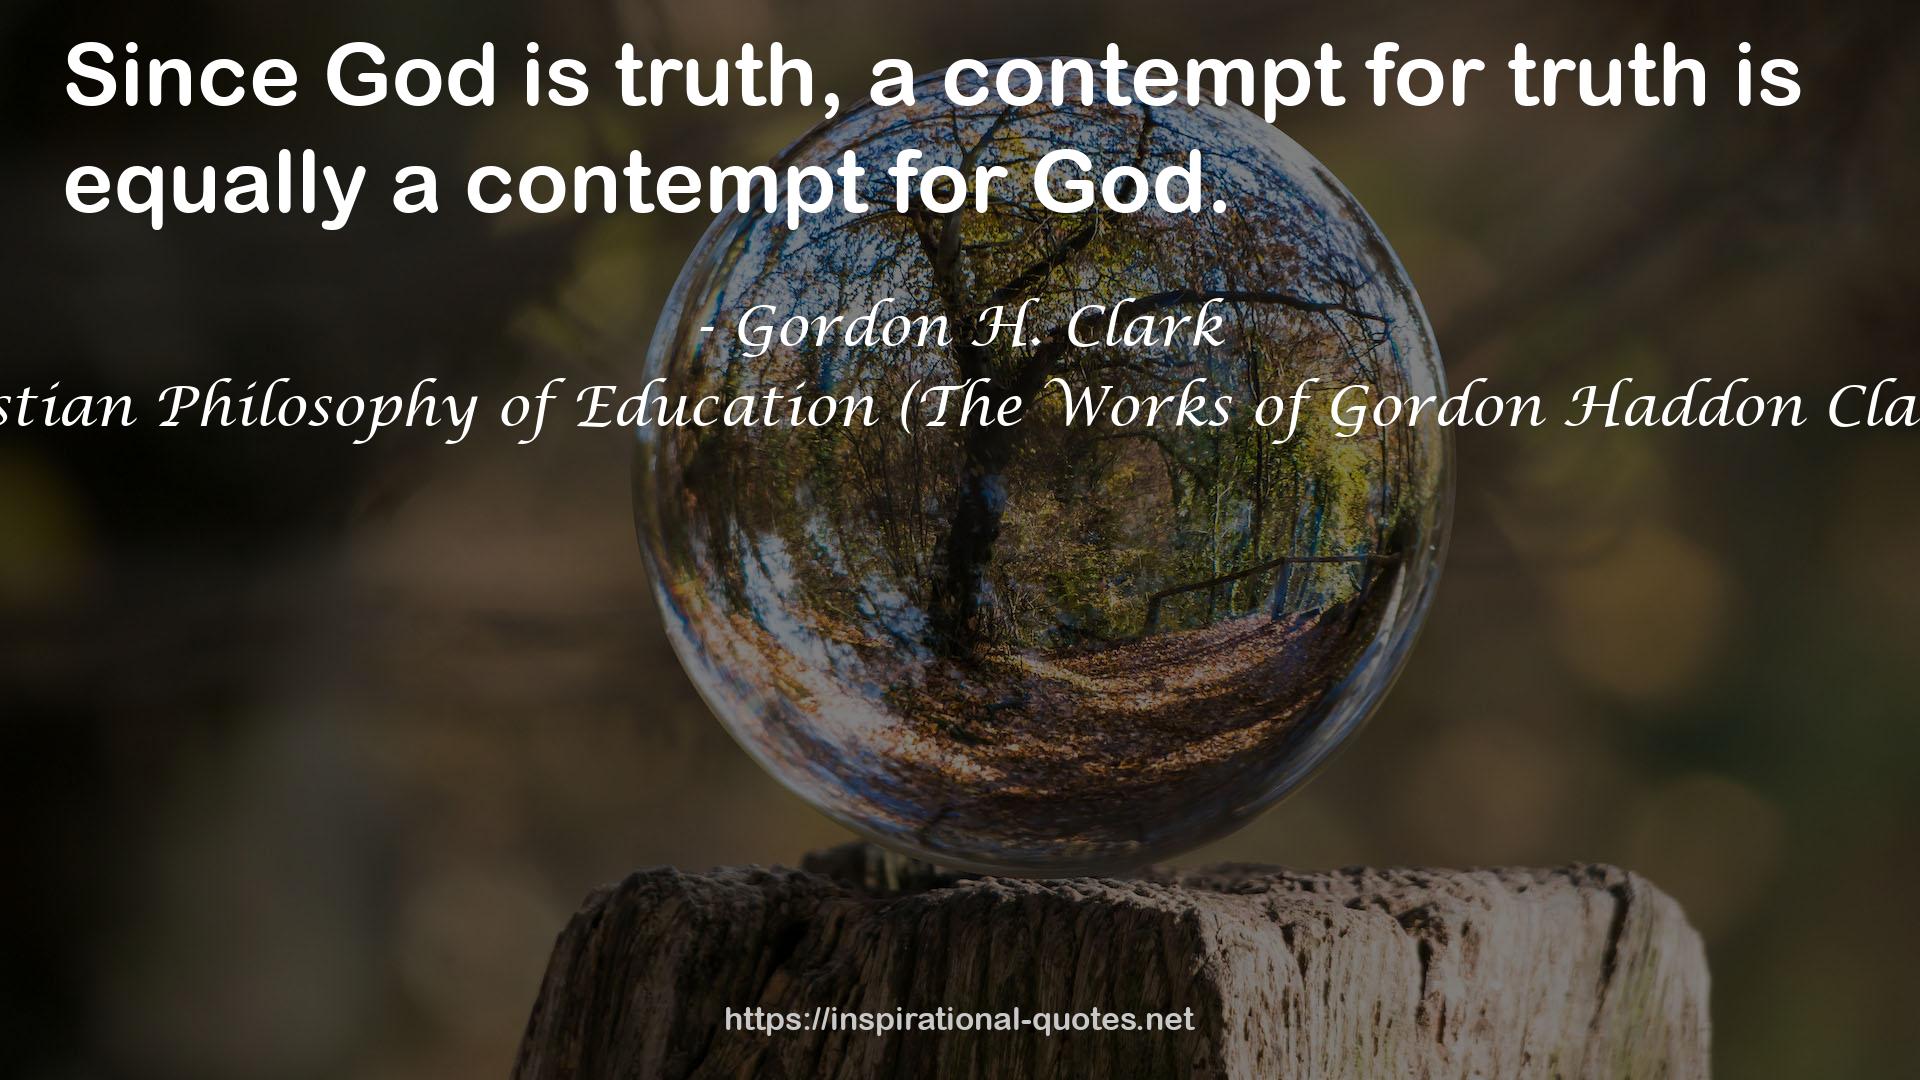 A Christian Philosophy of Education (The Works of Gordon Haddon Clark, #10) QUOTES